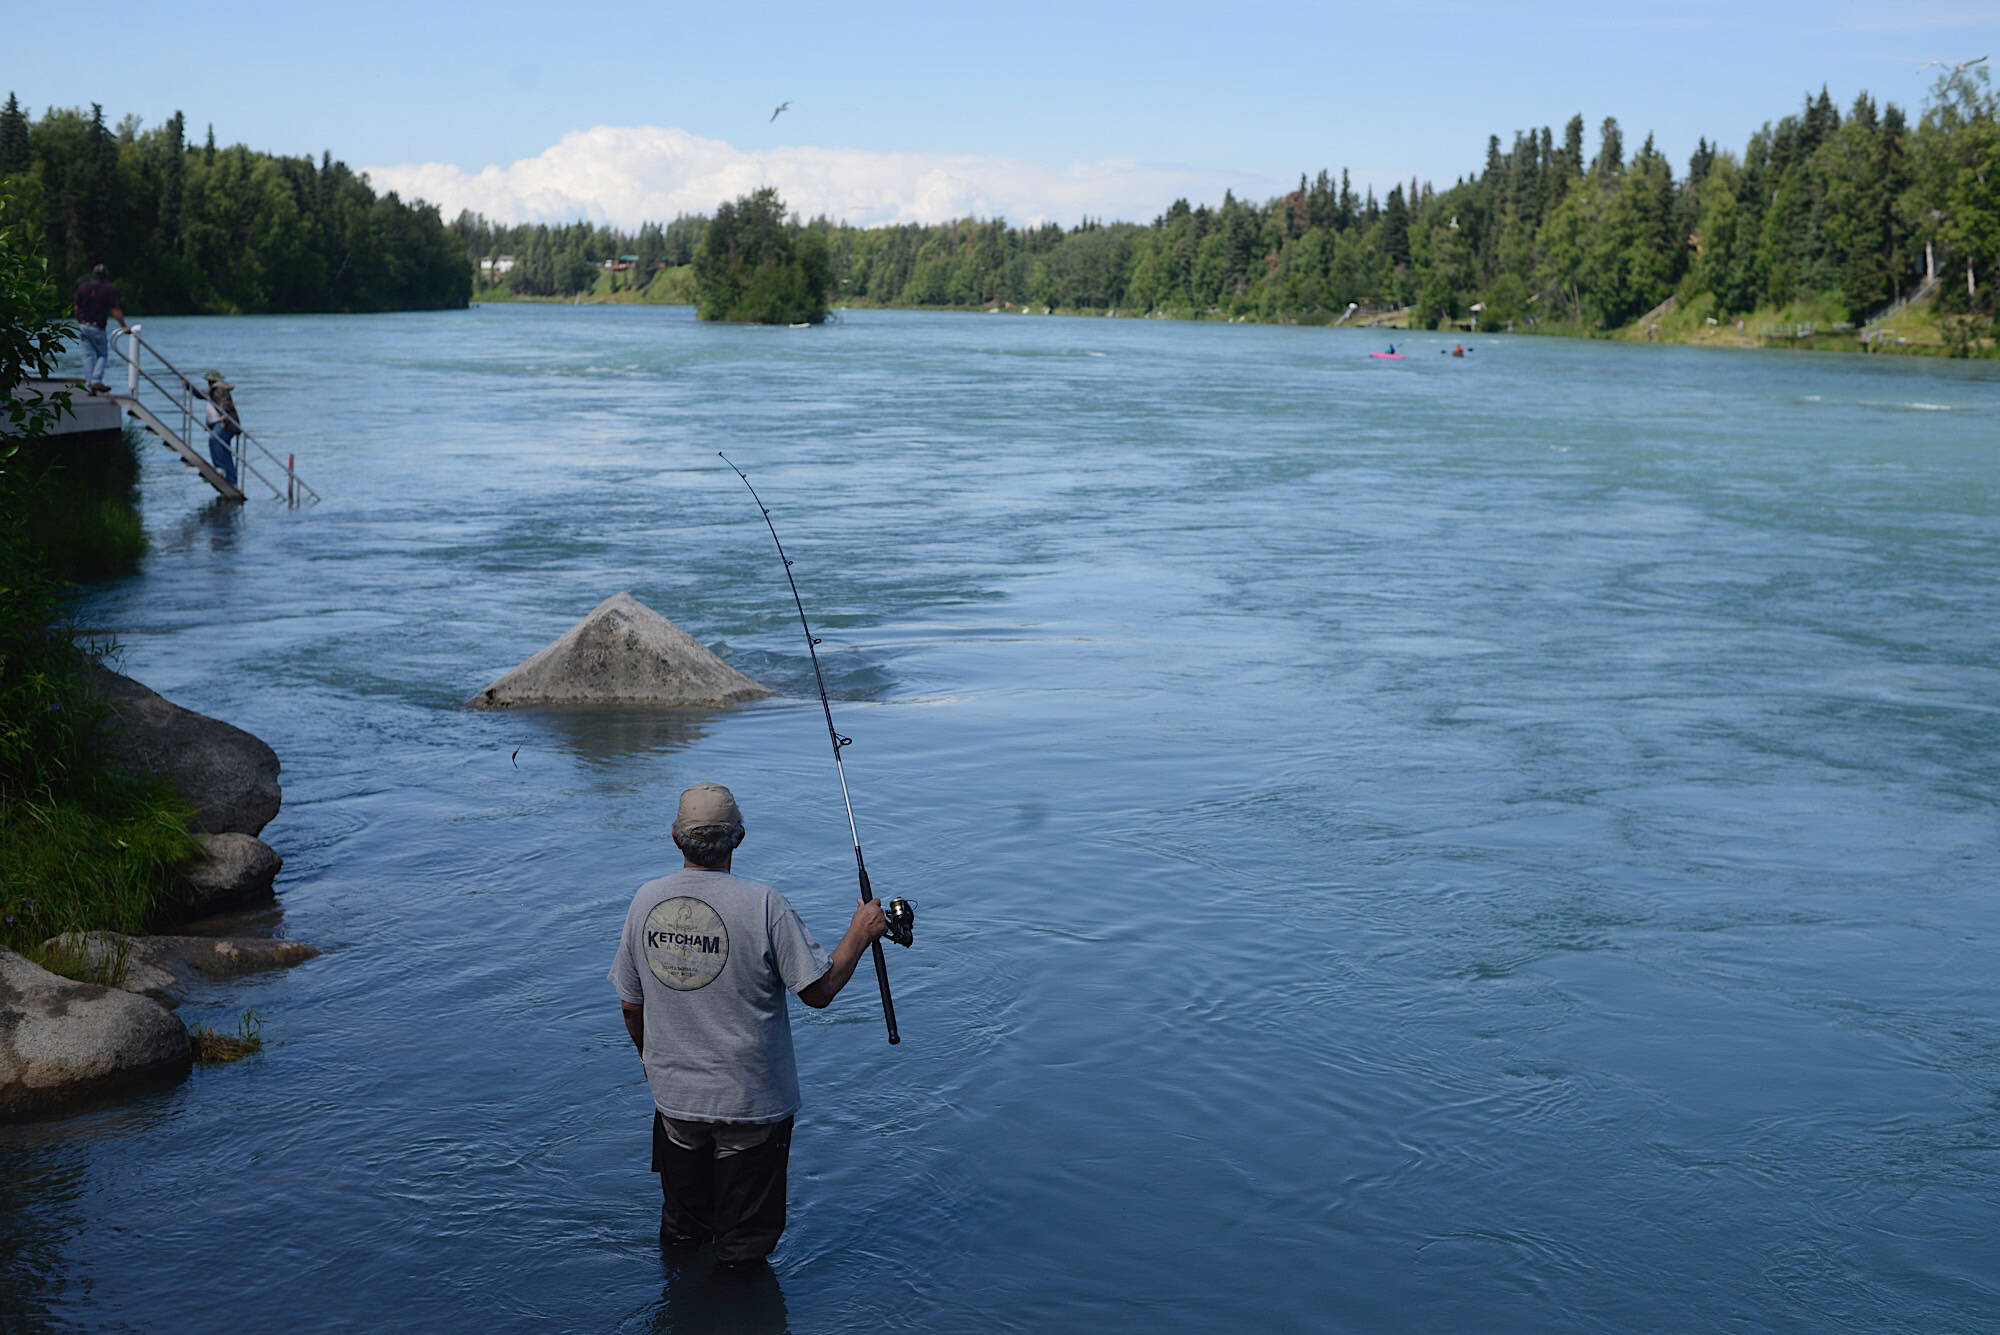 A man fishes in the Kenai River on July 16, 2018, in Soldotna, Alaska. (Peninsula Clarion/file)
A man fishes in the Kenai River on July 16, 2018, in Soldotna, Alaska. (Peninsula Clarion/file)